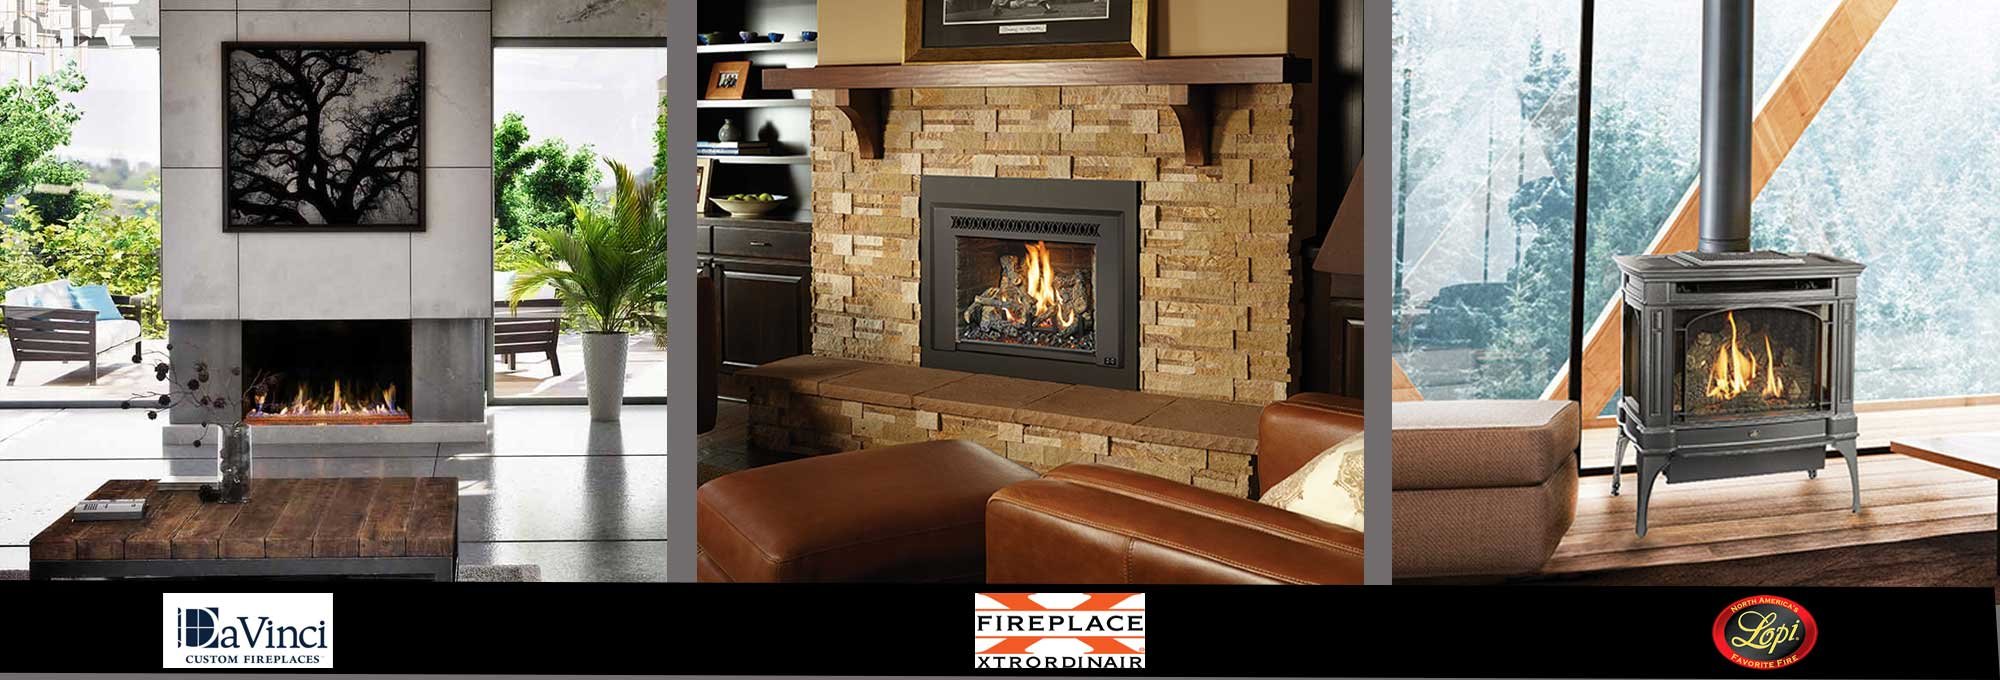 Fireplaces & Stoves in Taos New Mexico